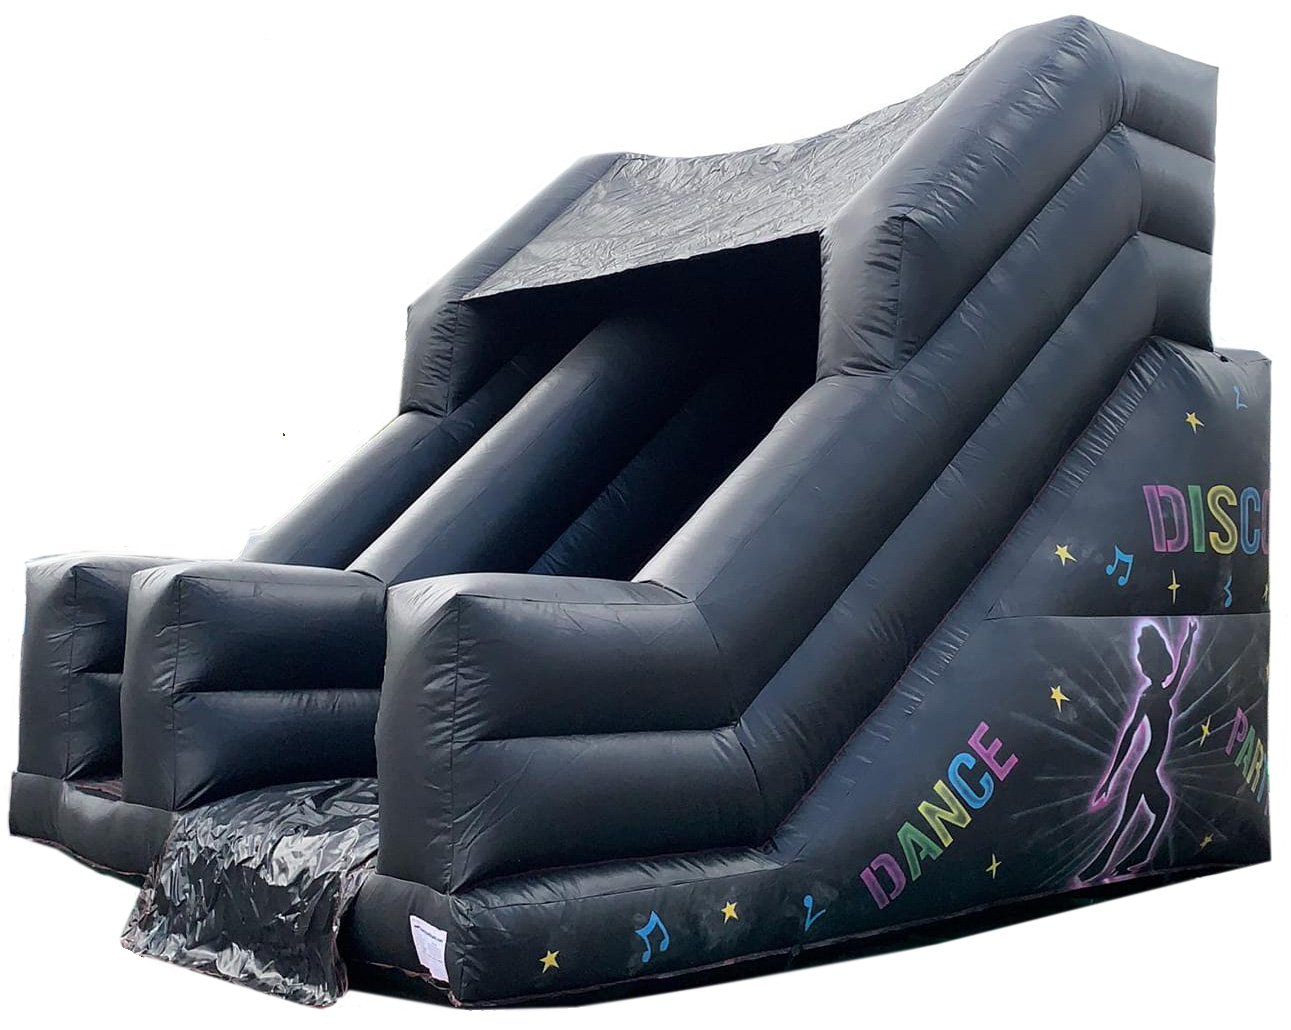 Bouncy Castle Sales - BC624 - Bouncy Inflatable for sale